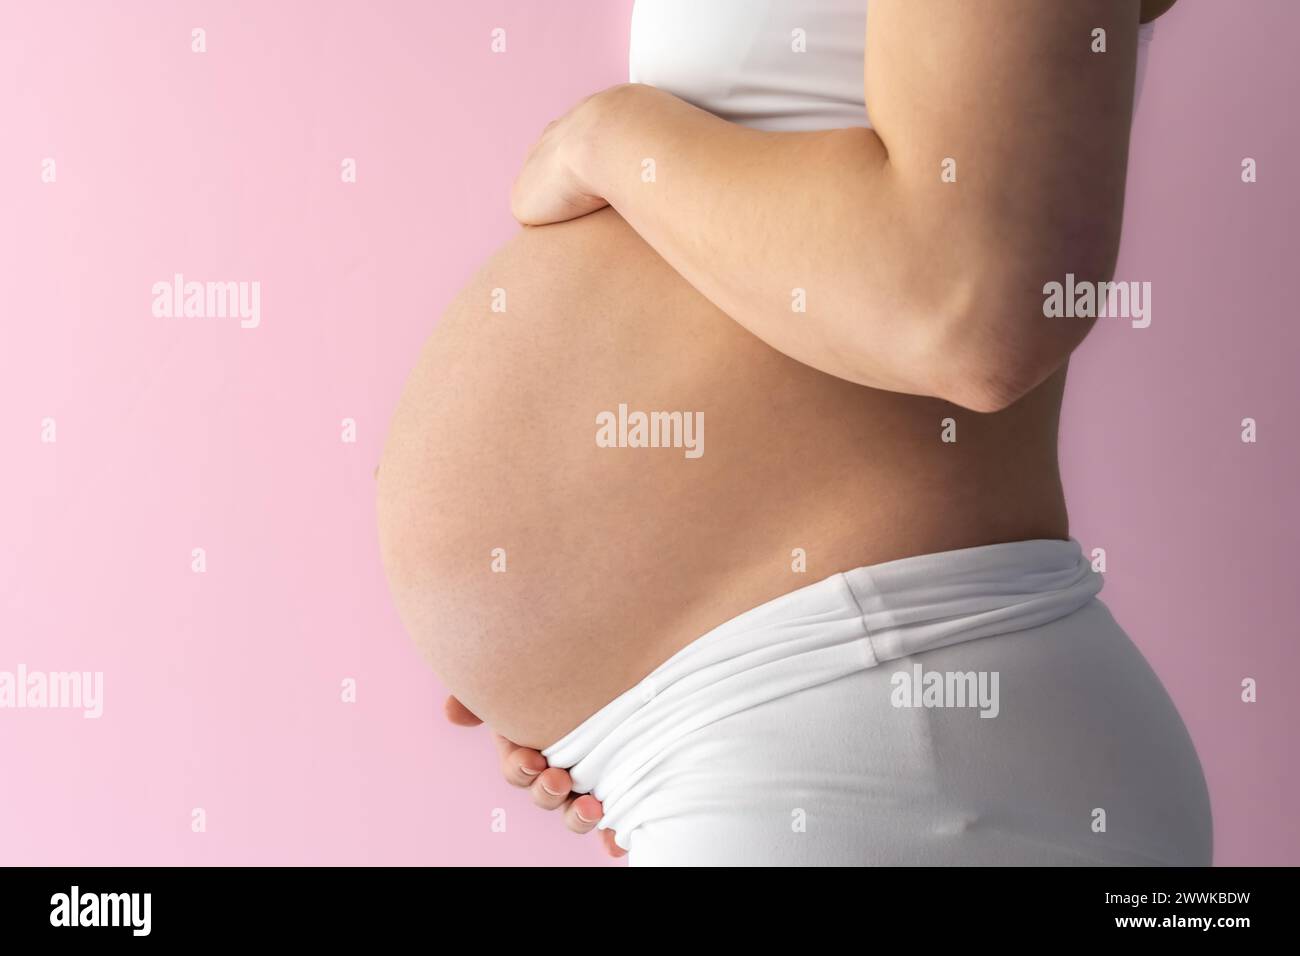 Description: Midsection of unrecognizable standing mother gently holding her very round pregnant baby belly. Side view. Pink background. Bright shot. Stock Photo